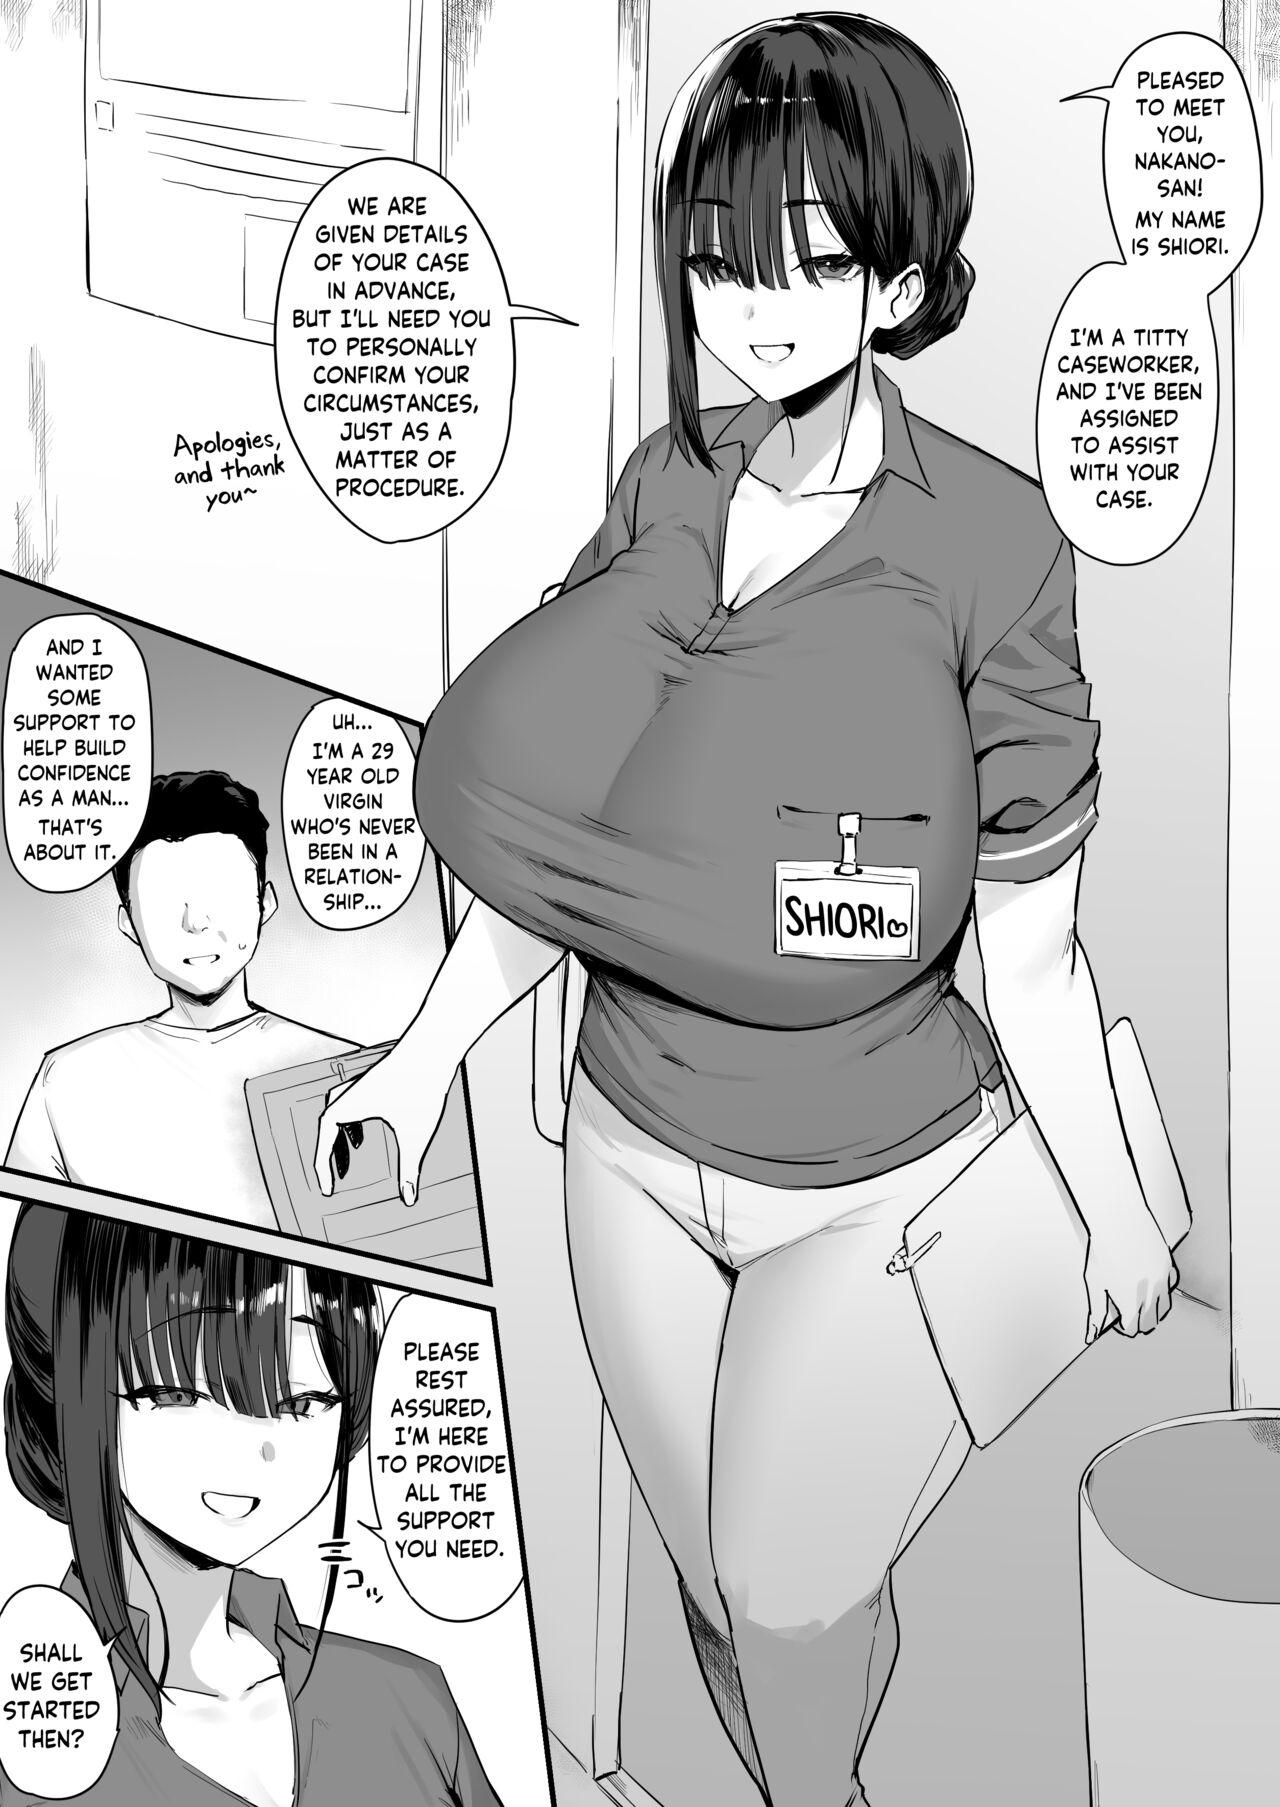 Gay Cock Oppai Caseworker | Titty Caseworker - Original Gayporn - Page 1